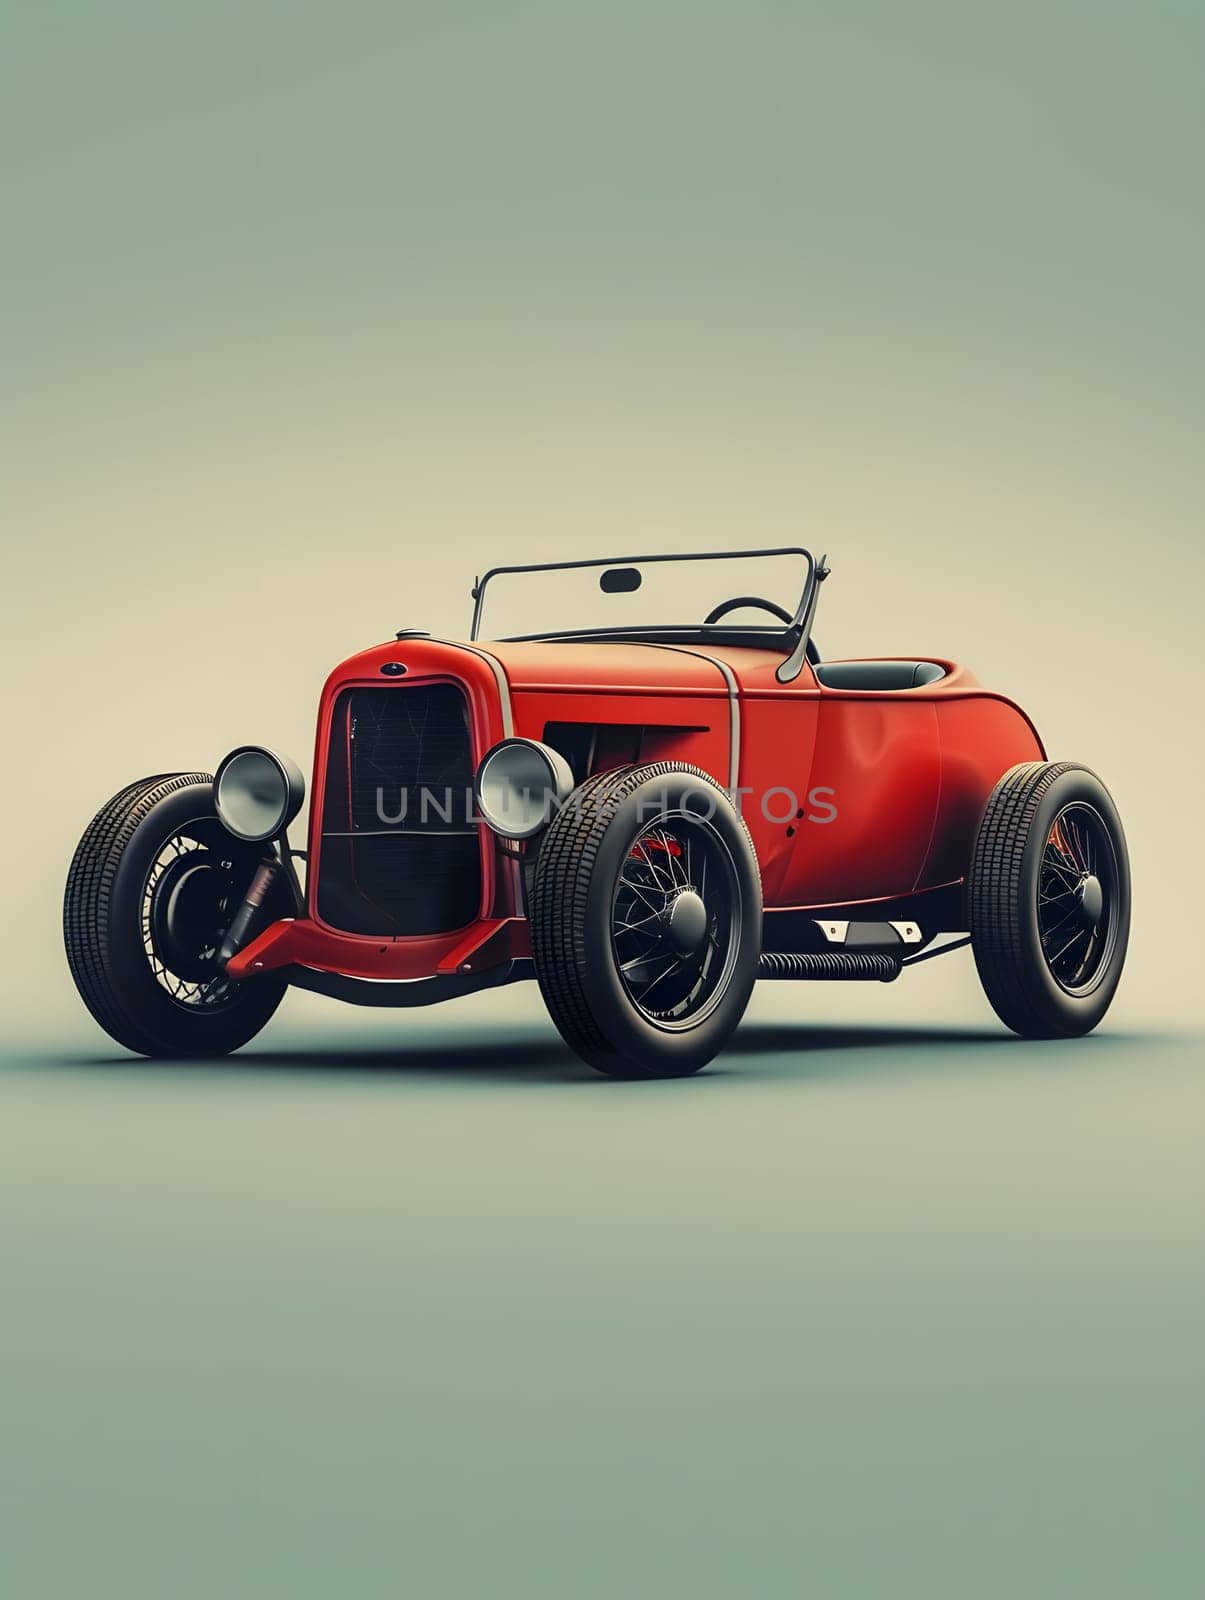 A red hot rod with sleek automotive design parked on white surface by Nadtochiy